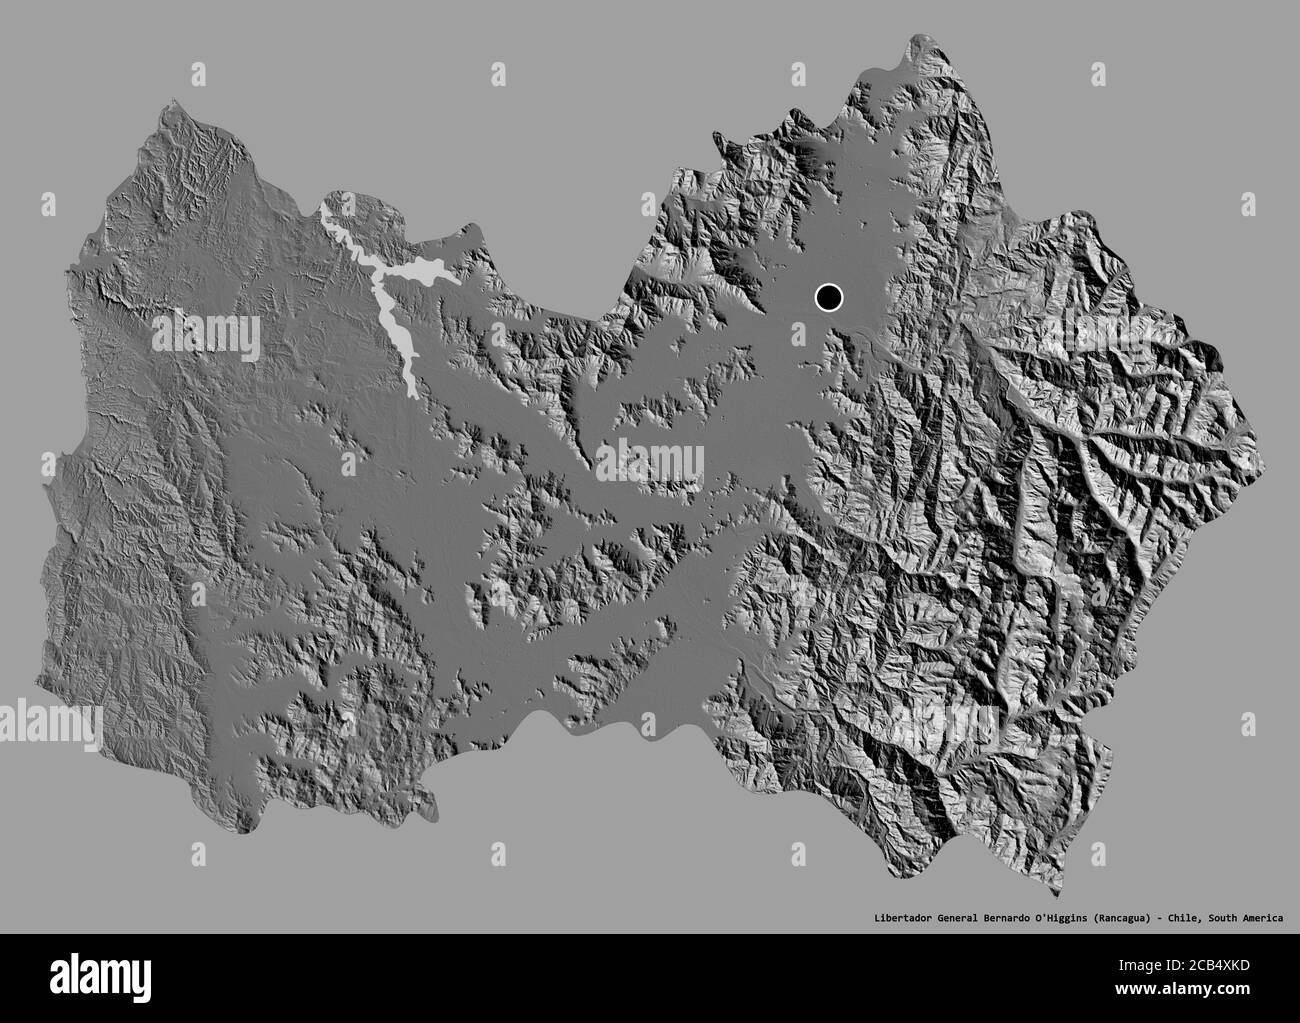 Shape of Libertador General Bernardo O'Higgins, region of Chile, with its capital isolated on a solid color background. Bilevel elevation map. 3D rend Stock Photo